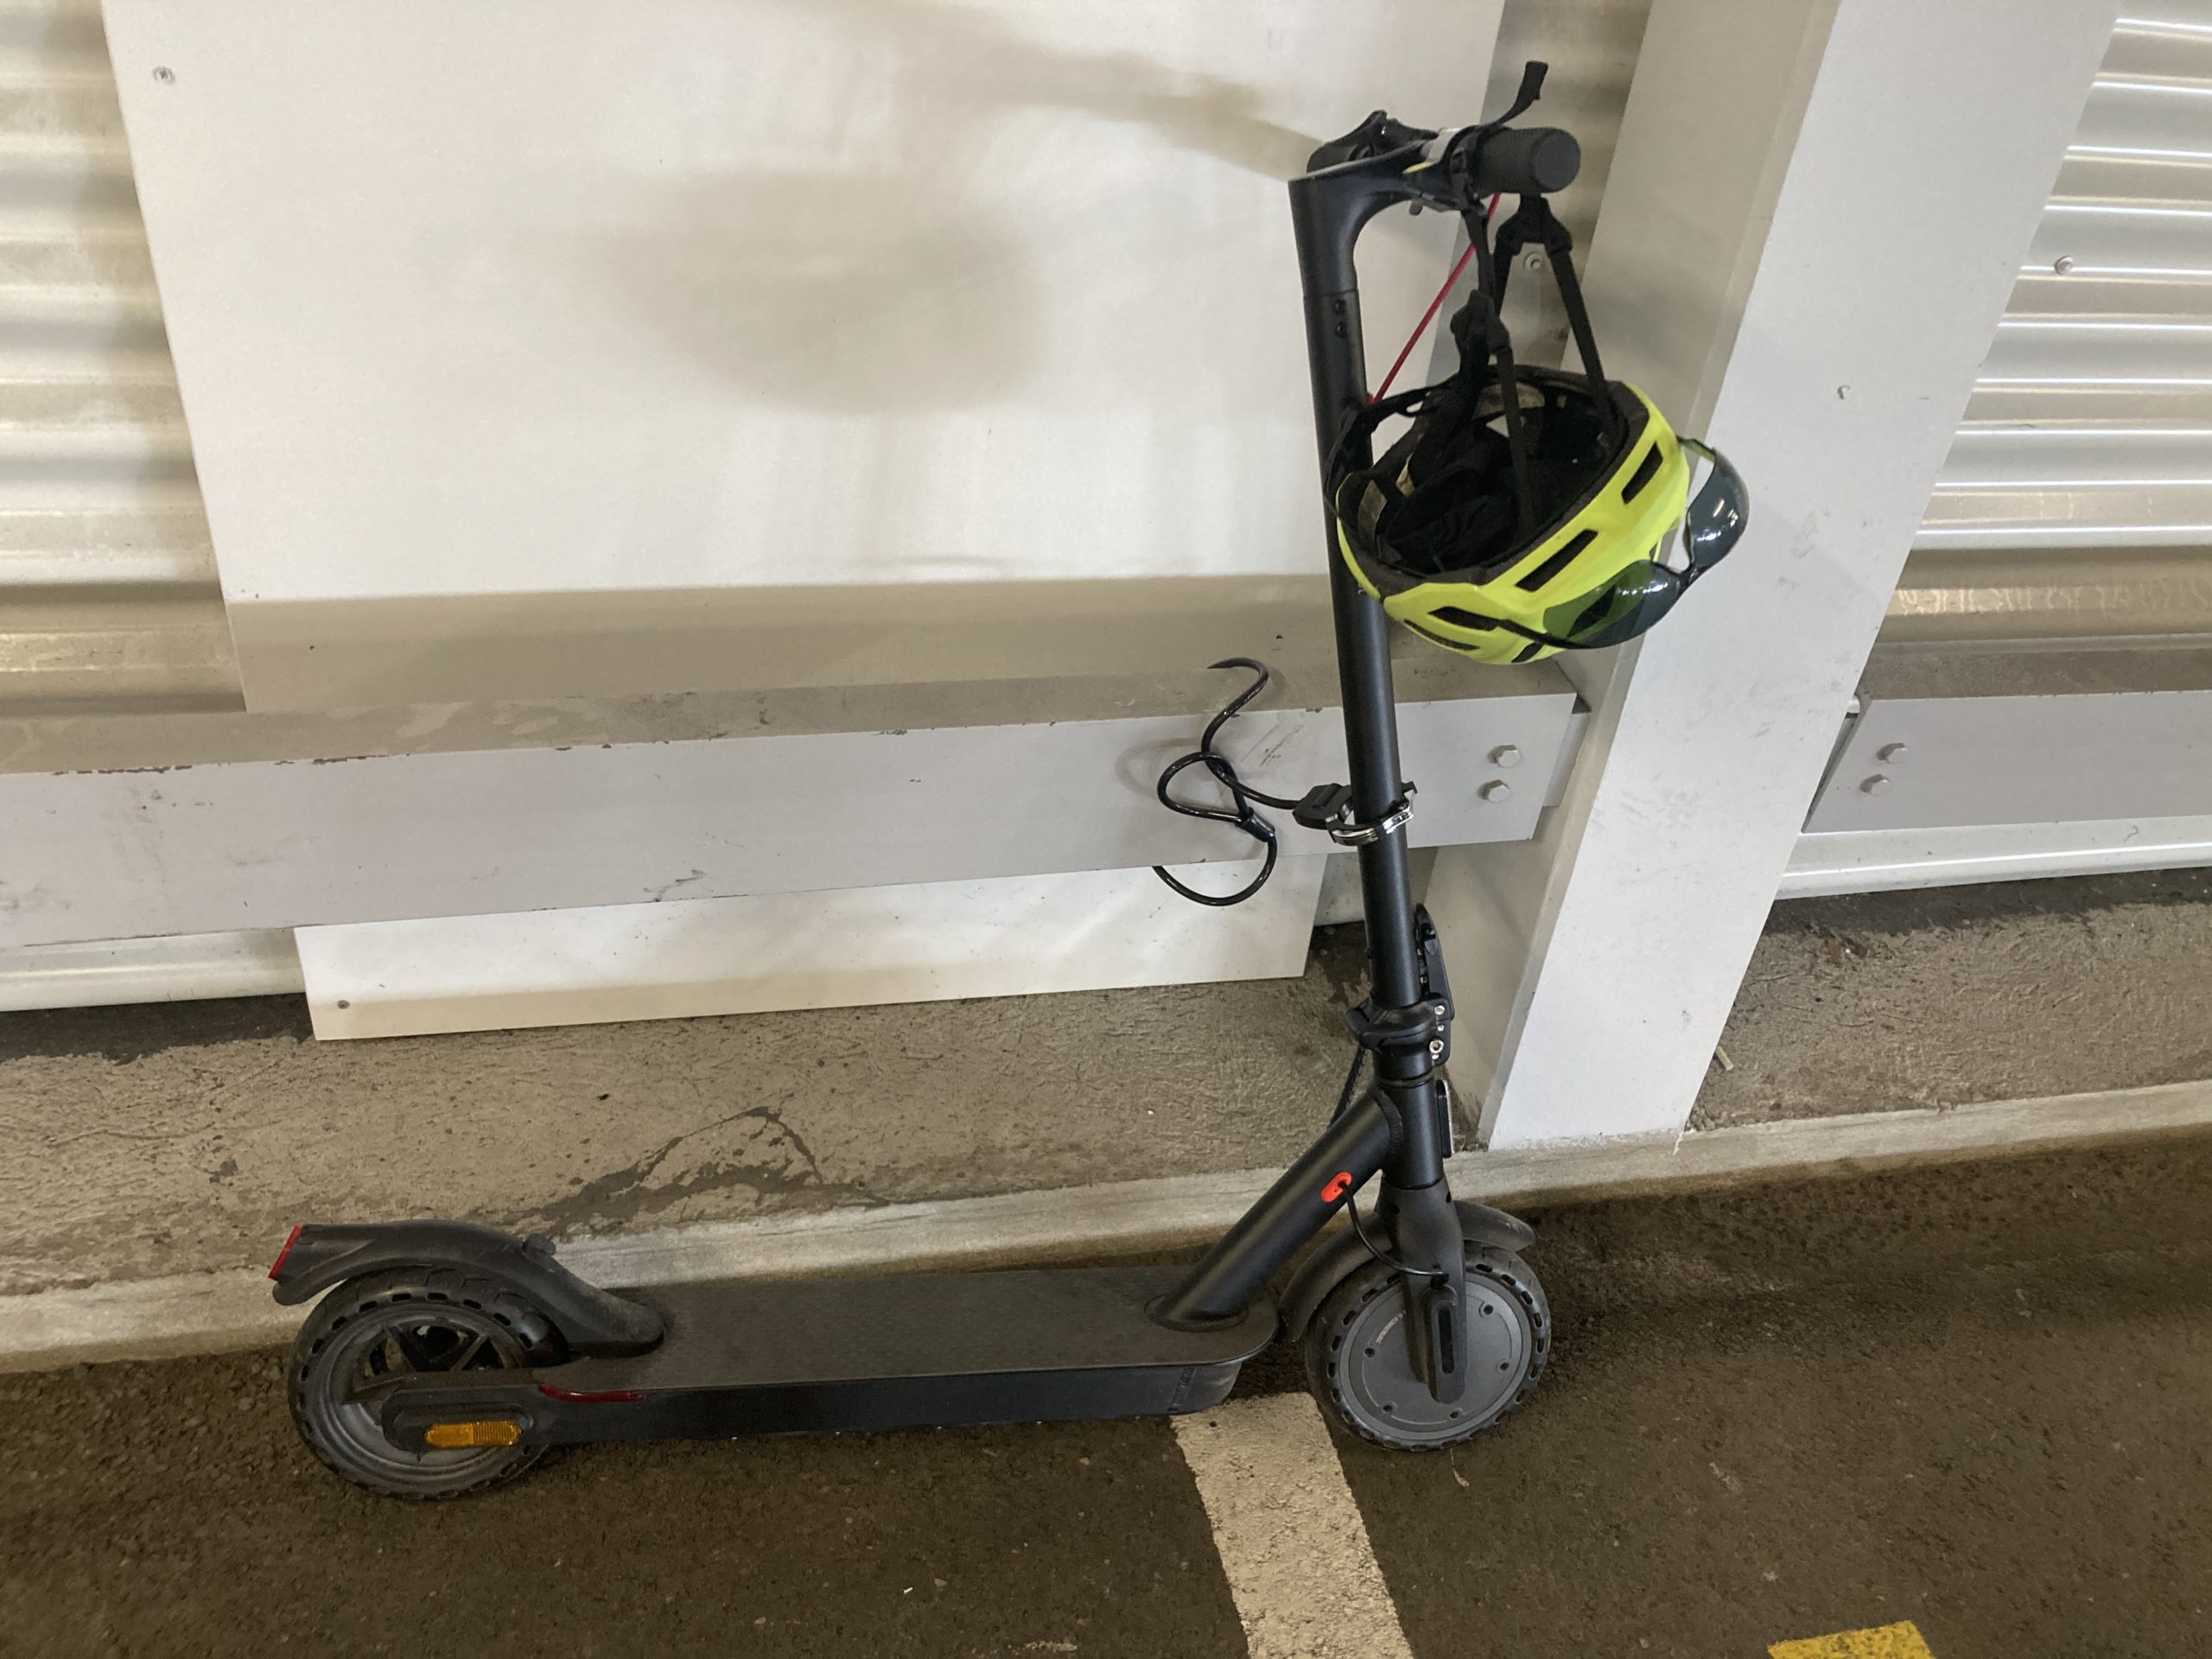 Shopping With an E-Scooter